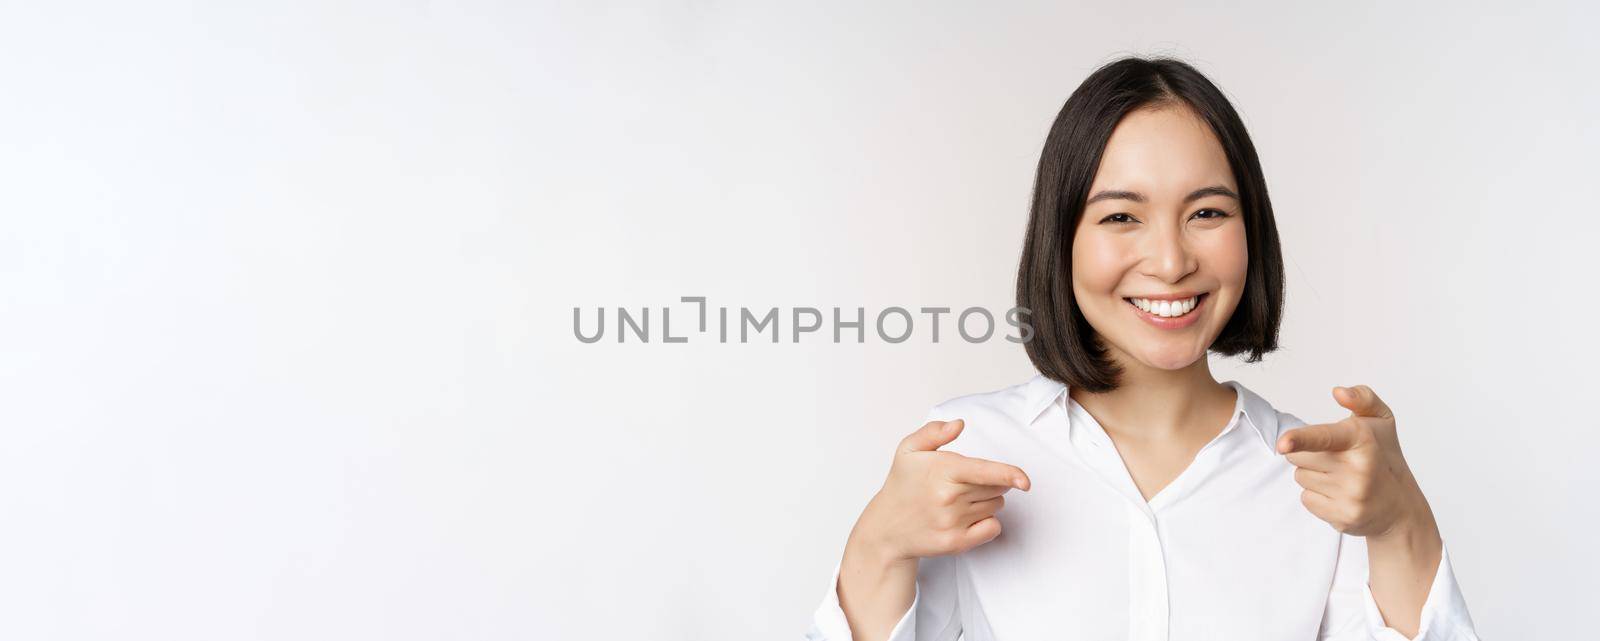 Close up of enthusiastic young woman smiling, pointing fingers at camera, choosing you, inviting and recruiting people, standing over white background.